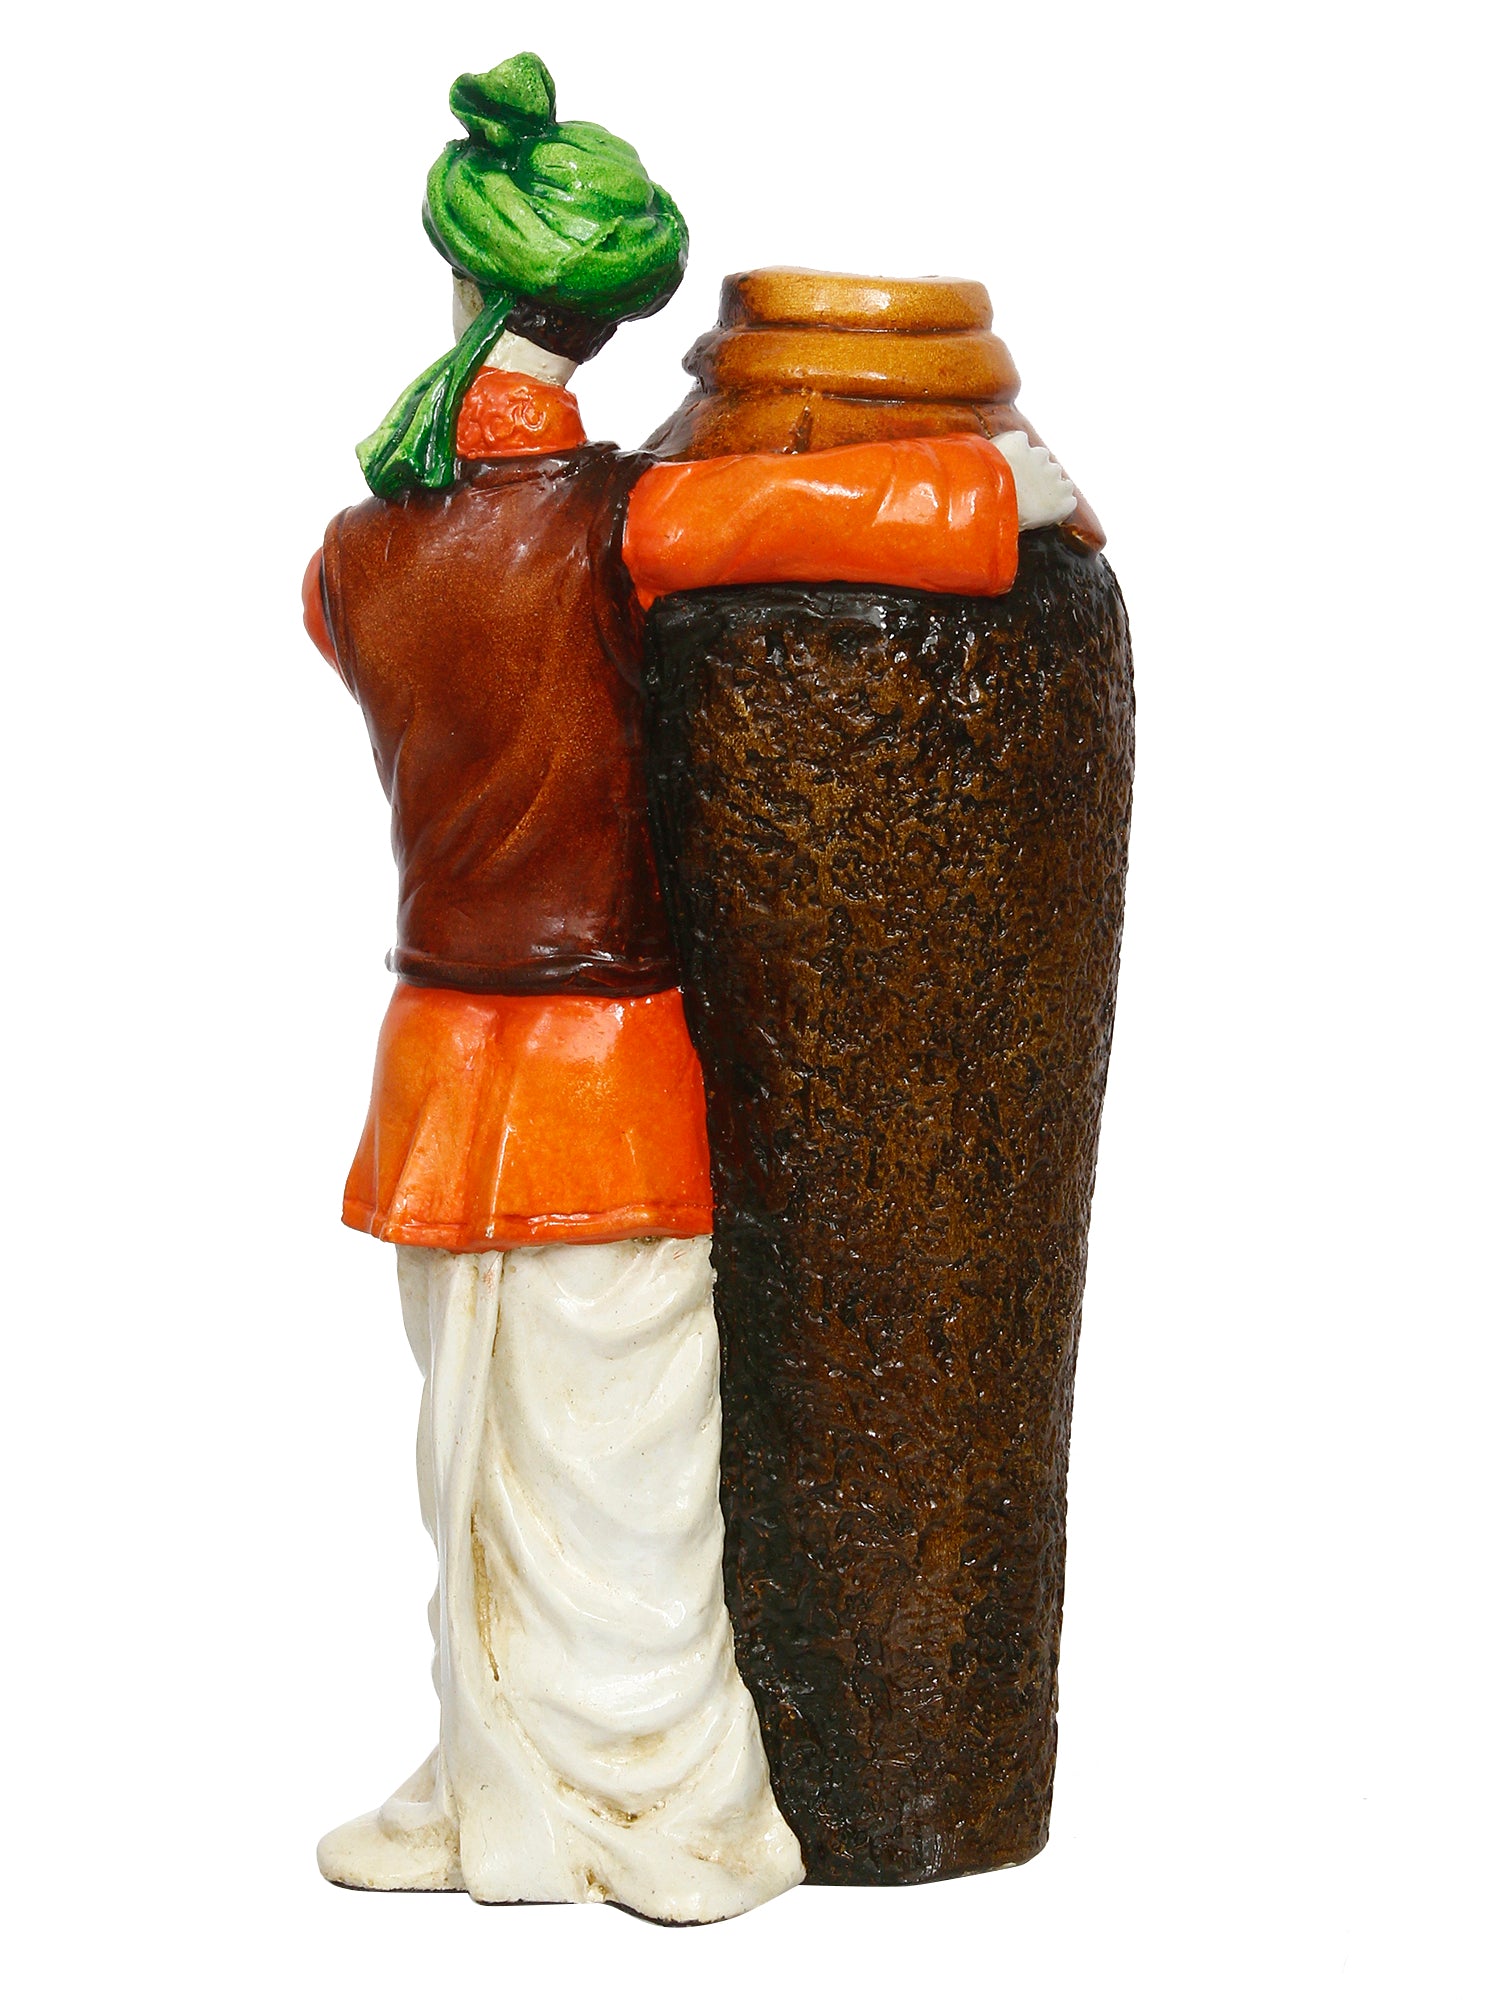 Rajasthani Men with Flower Pot Decorative Handcrafted Polyresin Showpiece 5